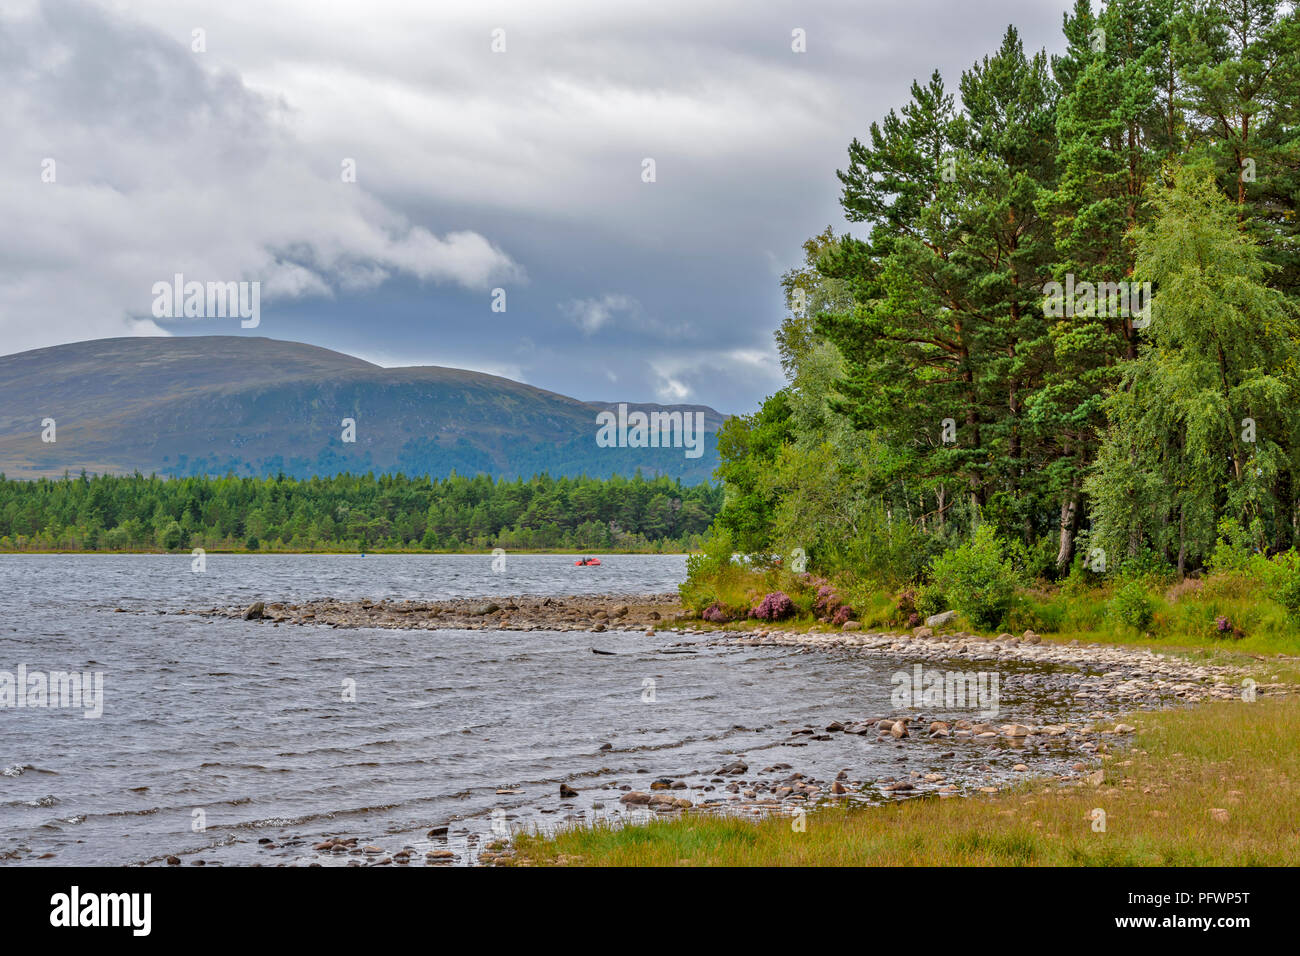 LOCH MORLICH NEAR AVIEMORE SCOTLAND THE SHORELINE WITH TREES AND REEDS AND RED BOAT ON THE WATER Stock Photo